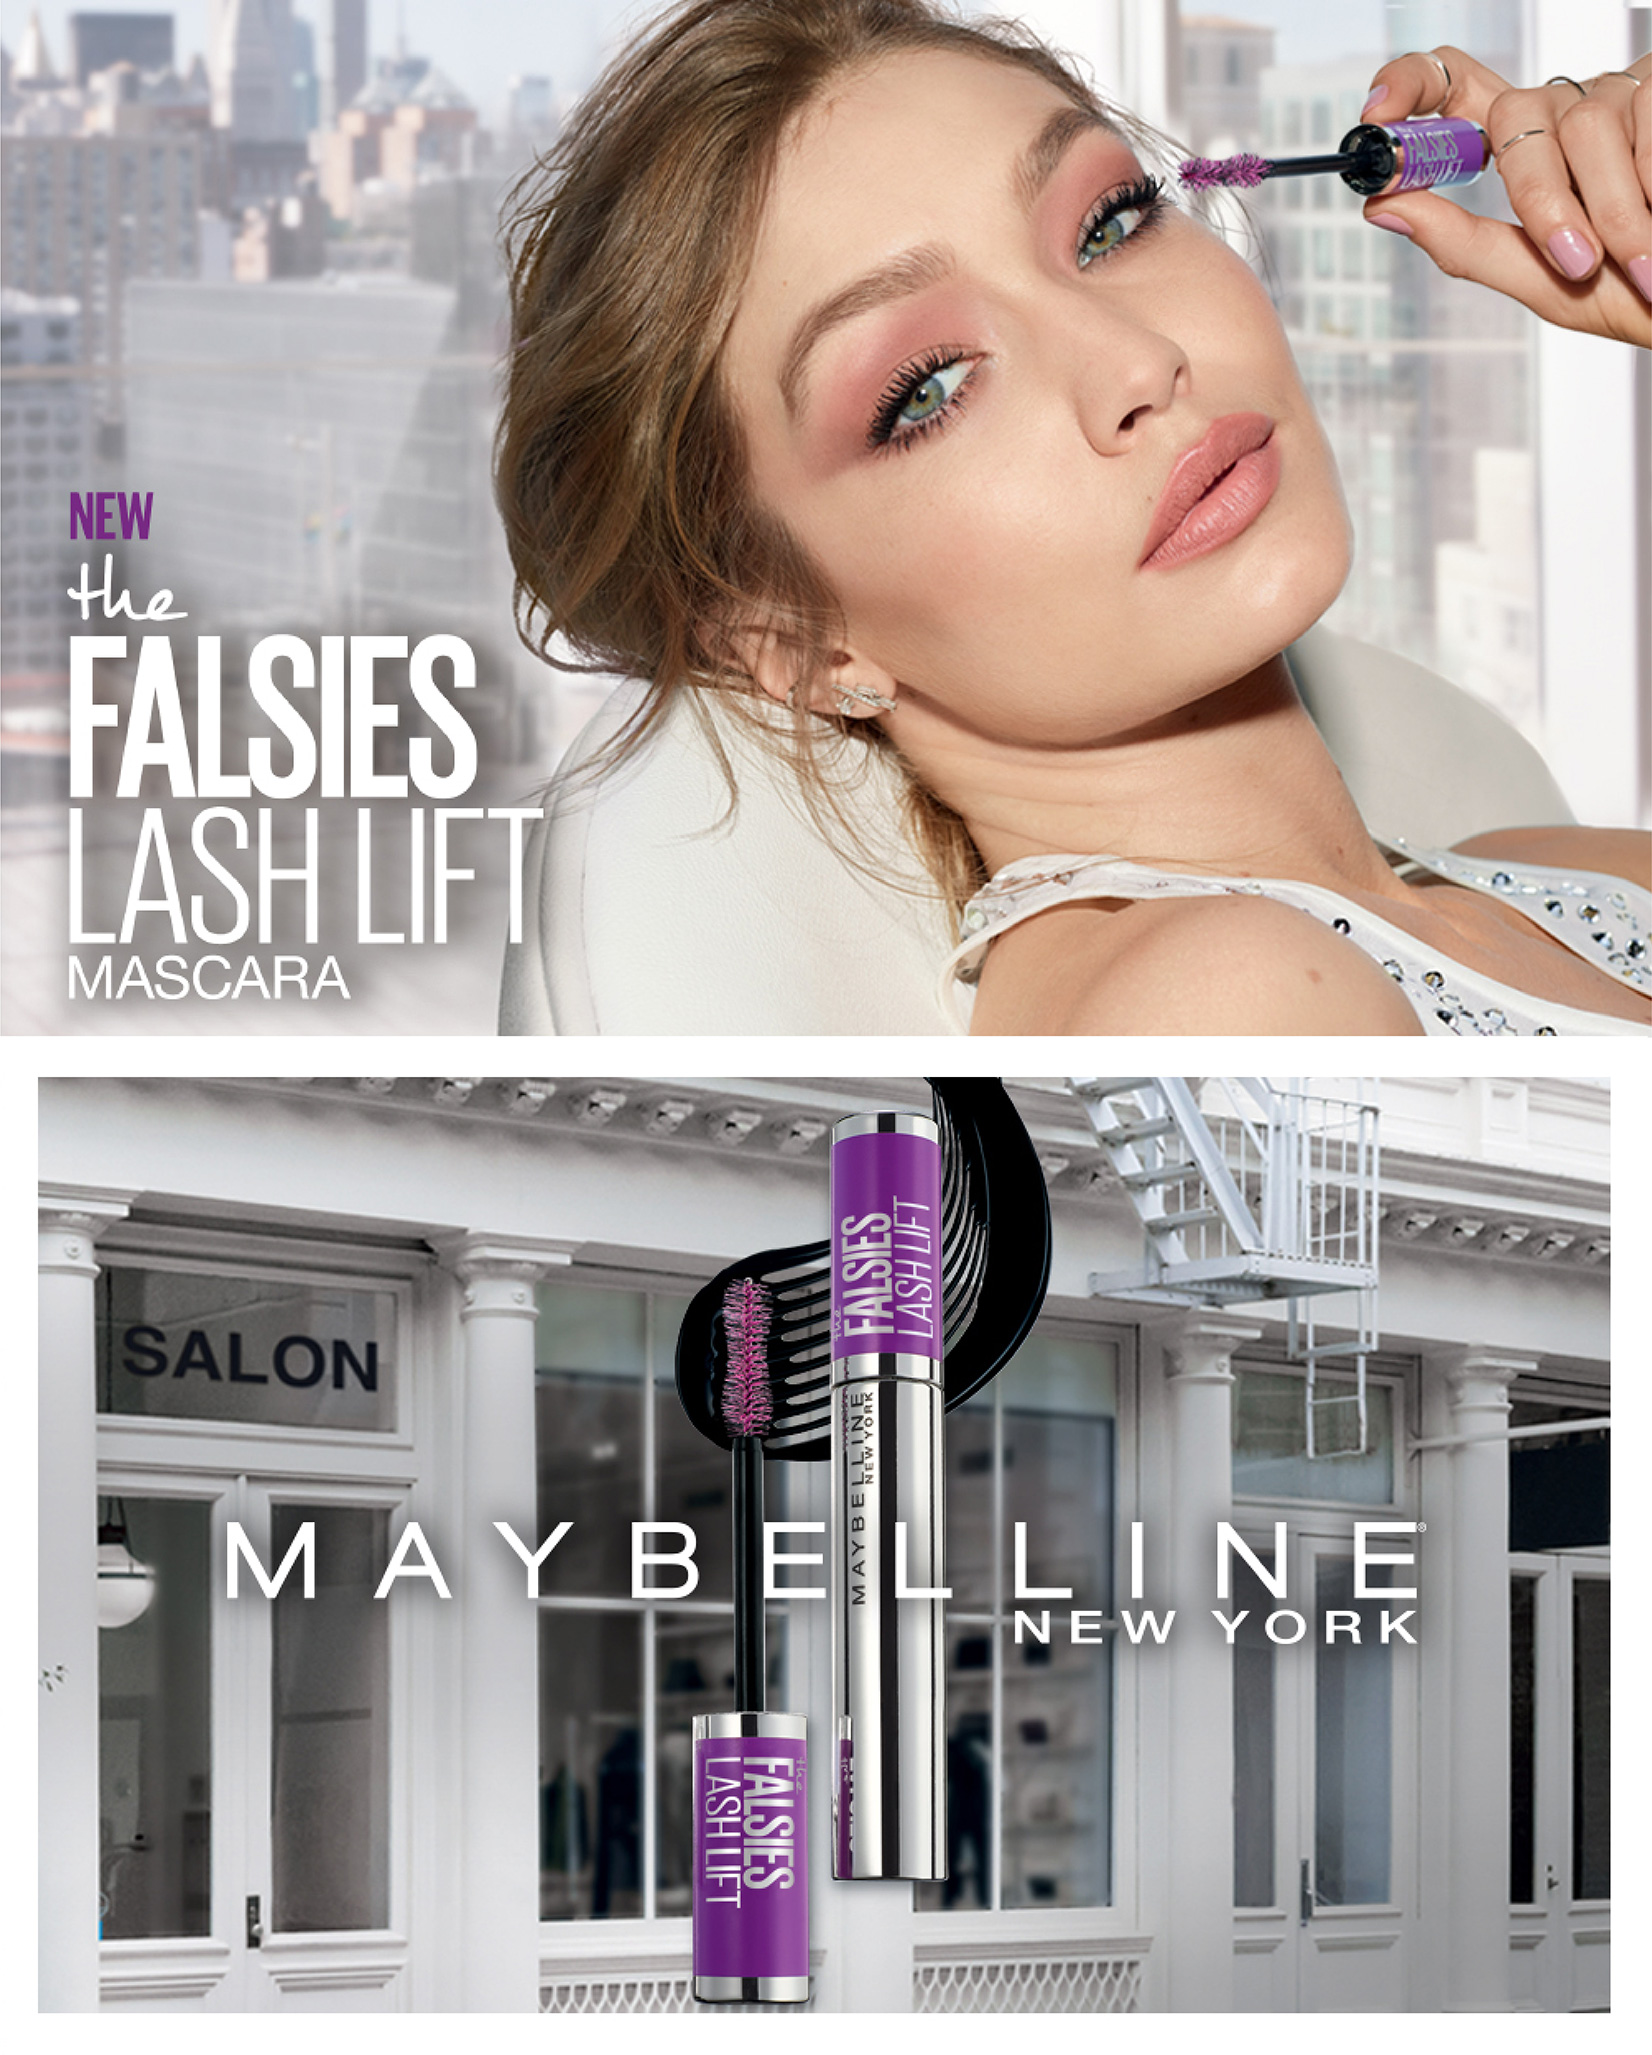 Falsies lash lift mascara by Maybelline : review - Eye- Tryandreview.com